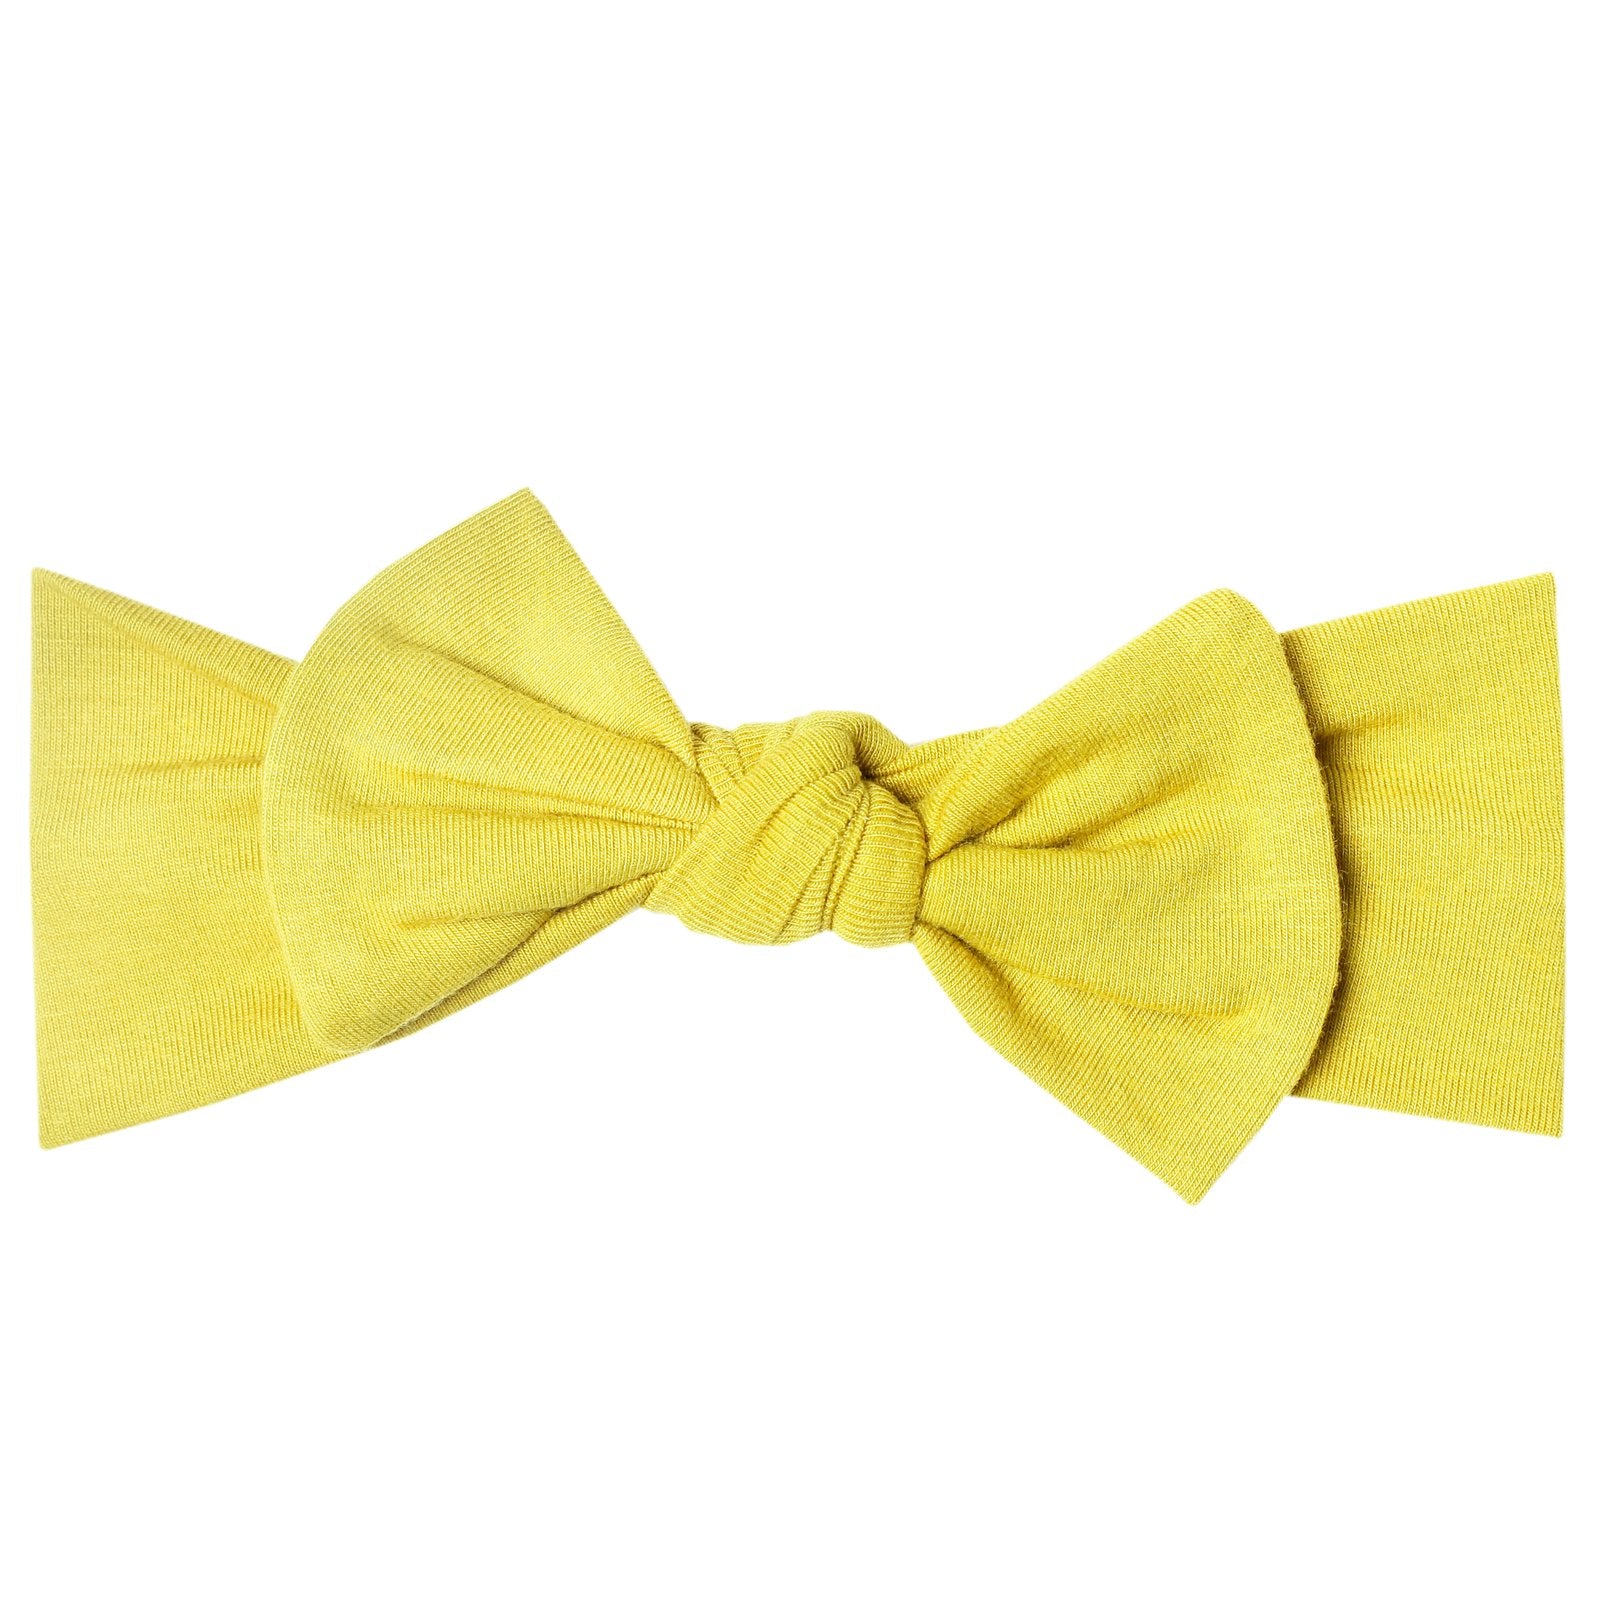 Squirt Knit Headband Bow  - Doodlebug's Children's Boutique